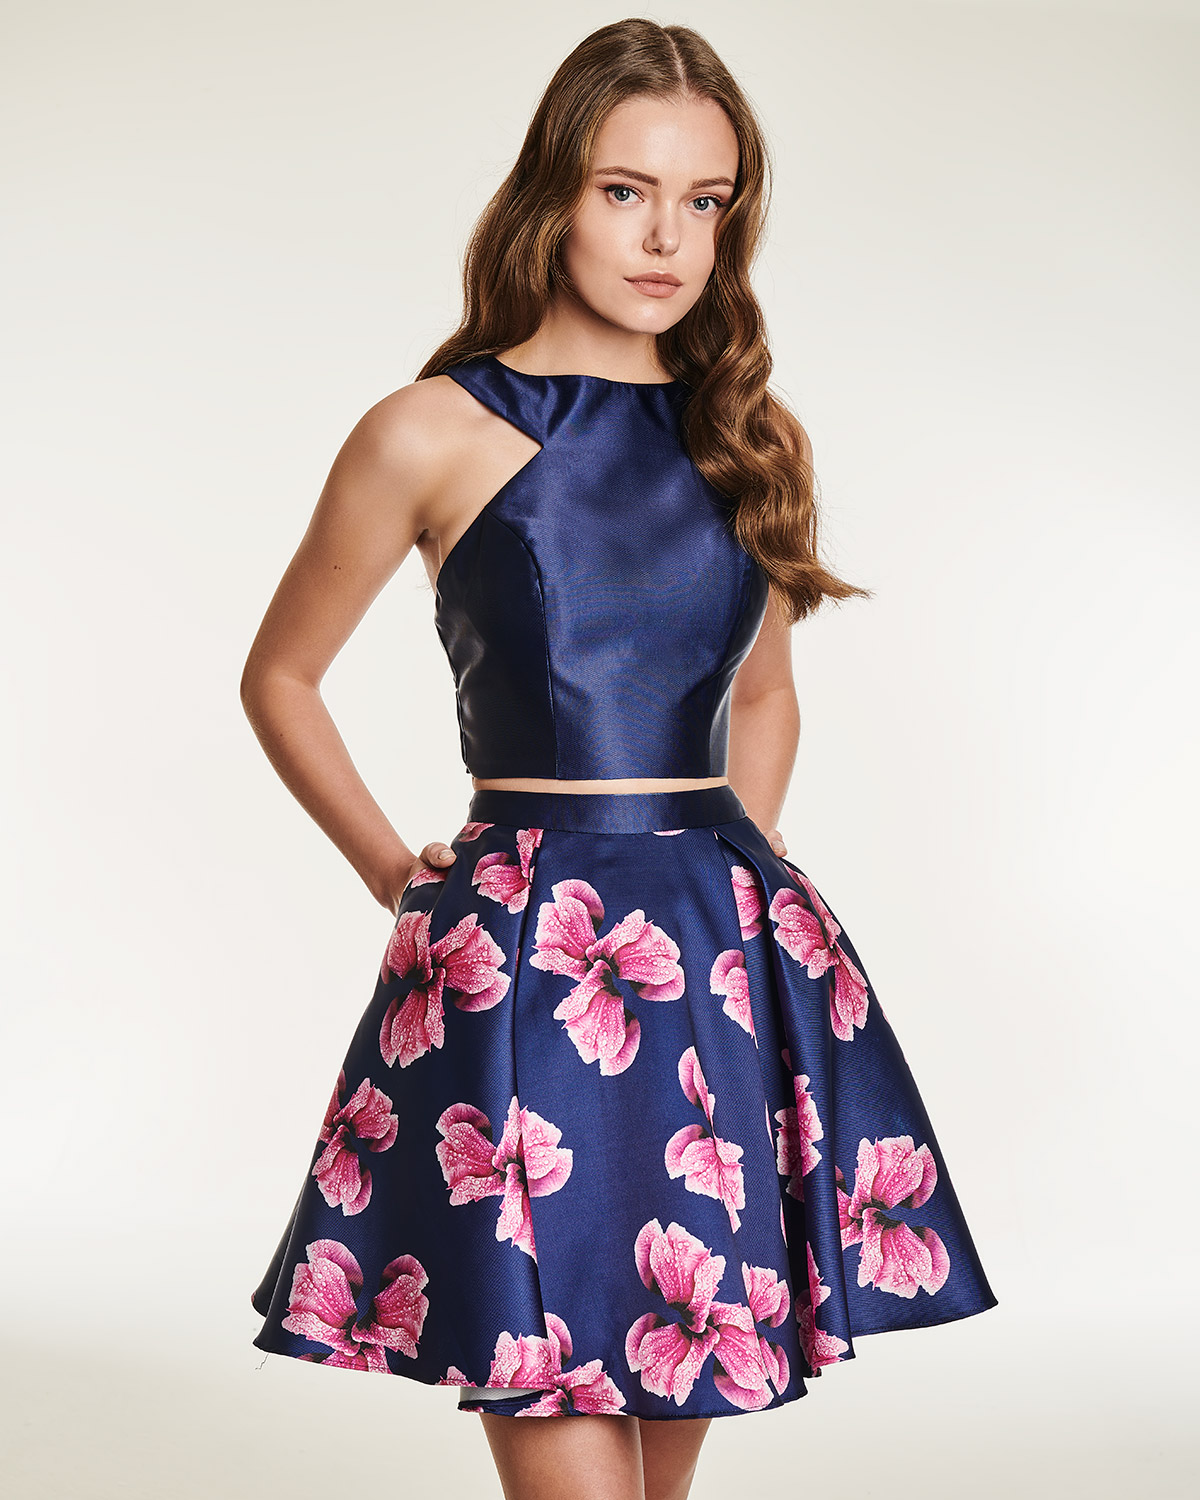 Cocktail Dresses / Short skirt with floral details and top